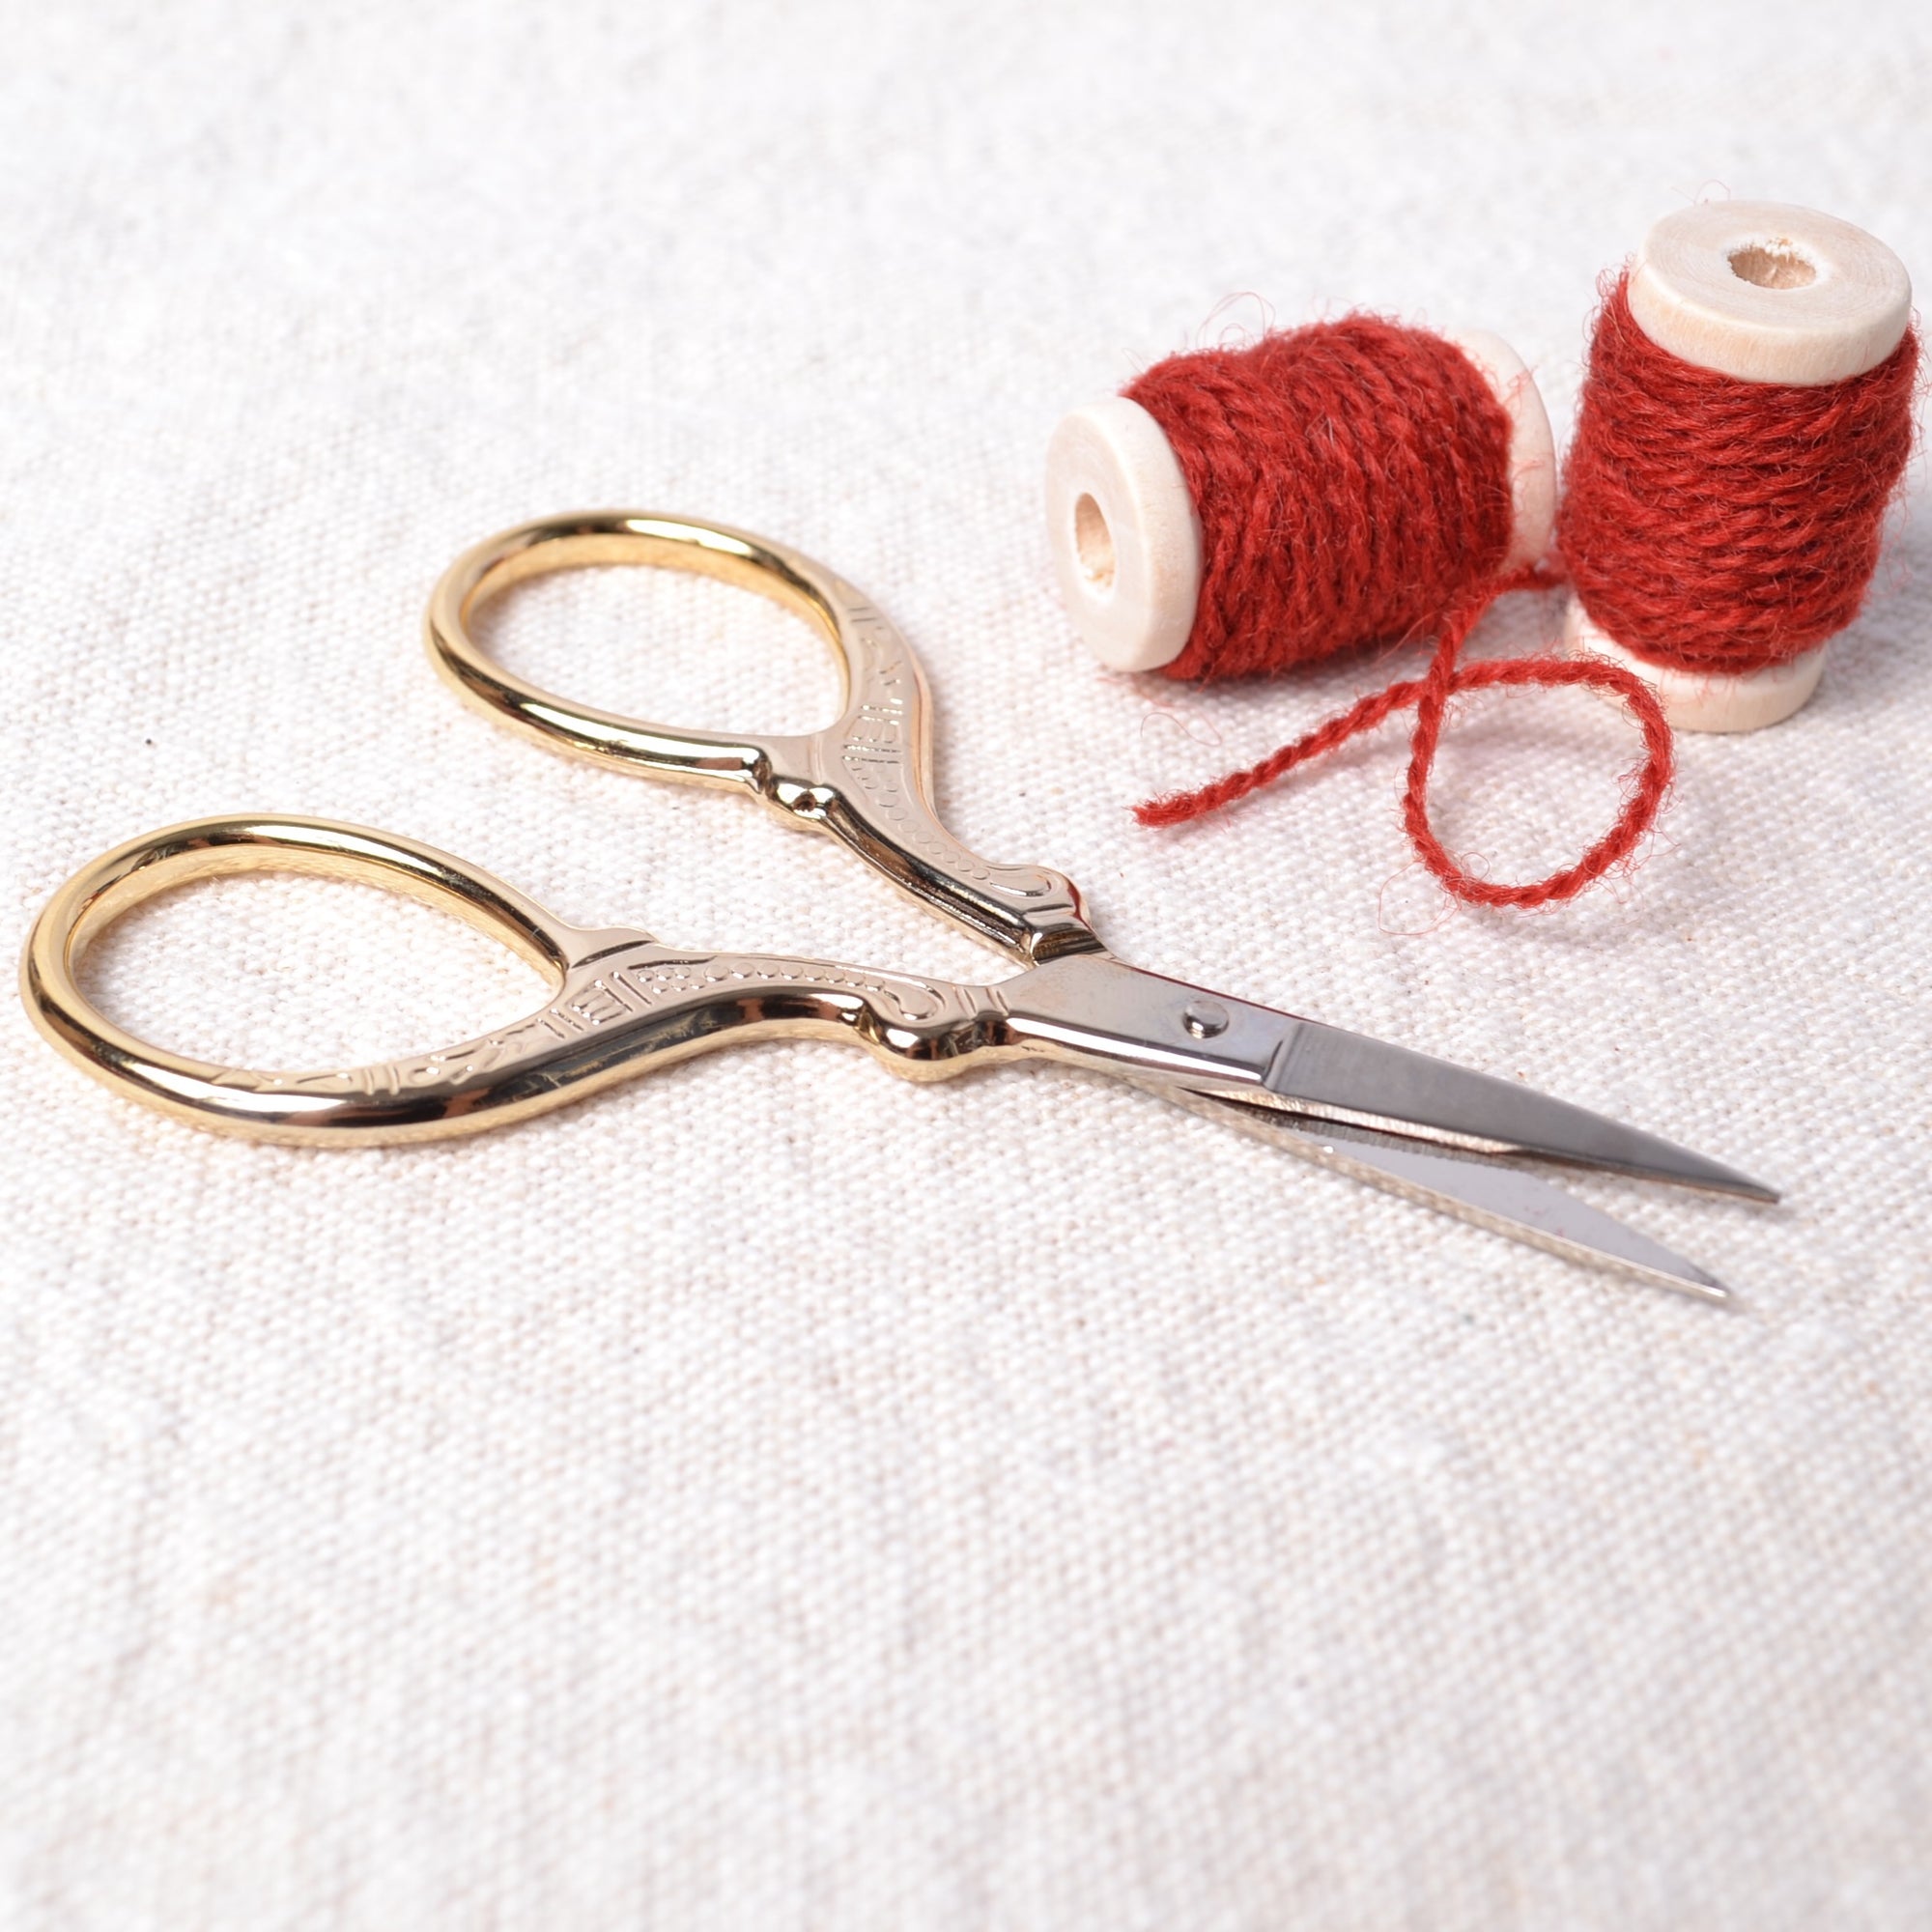 Embroidery Scissors - A Threaded Needle